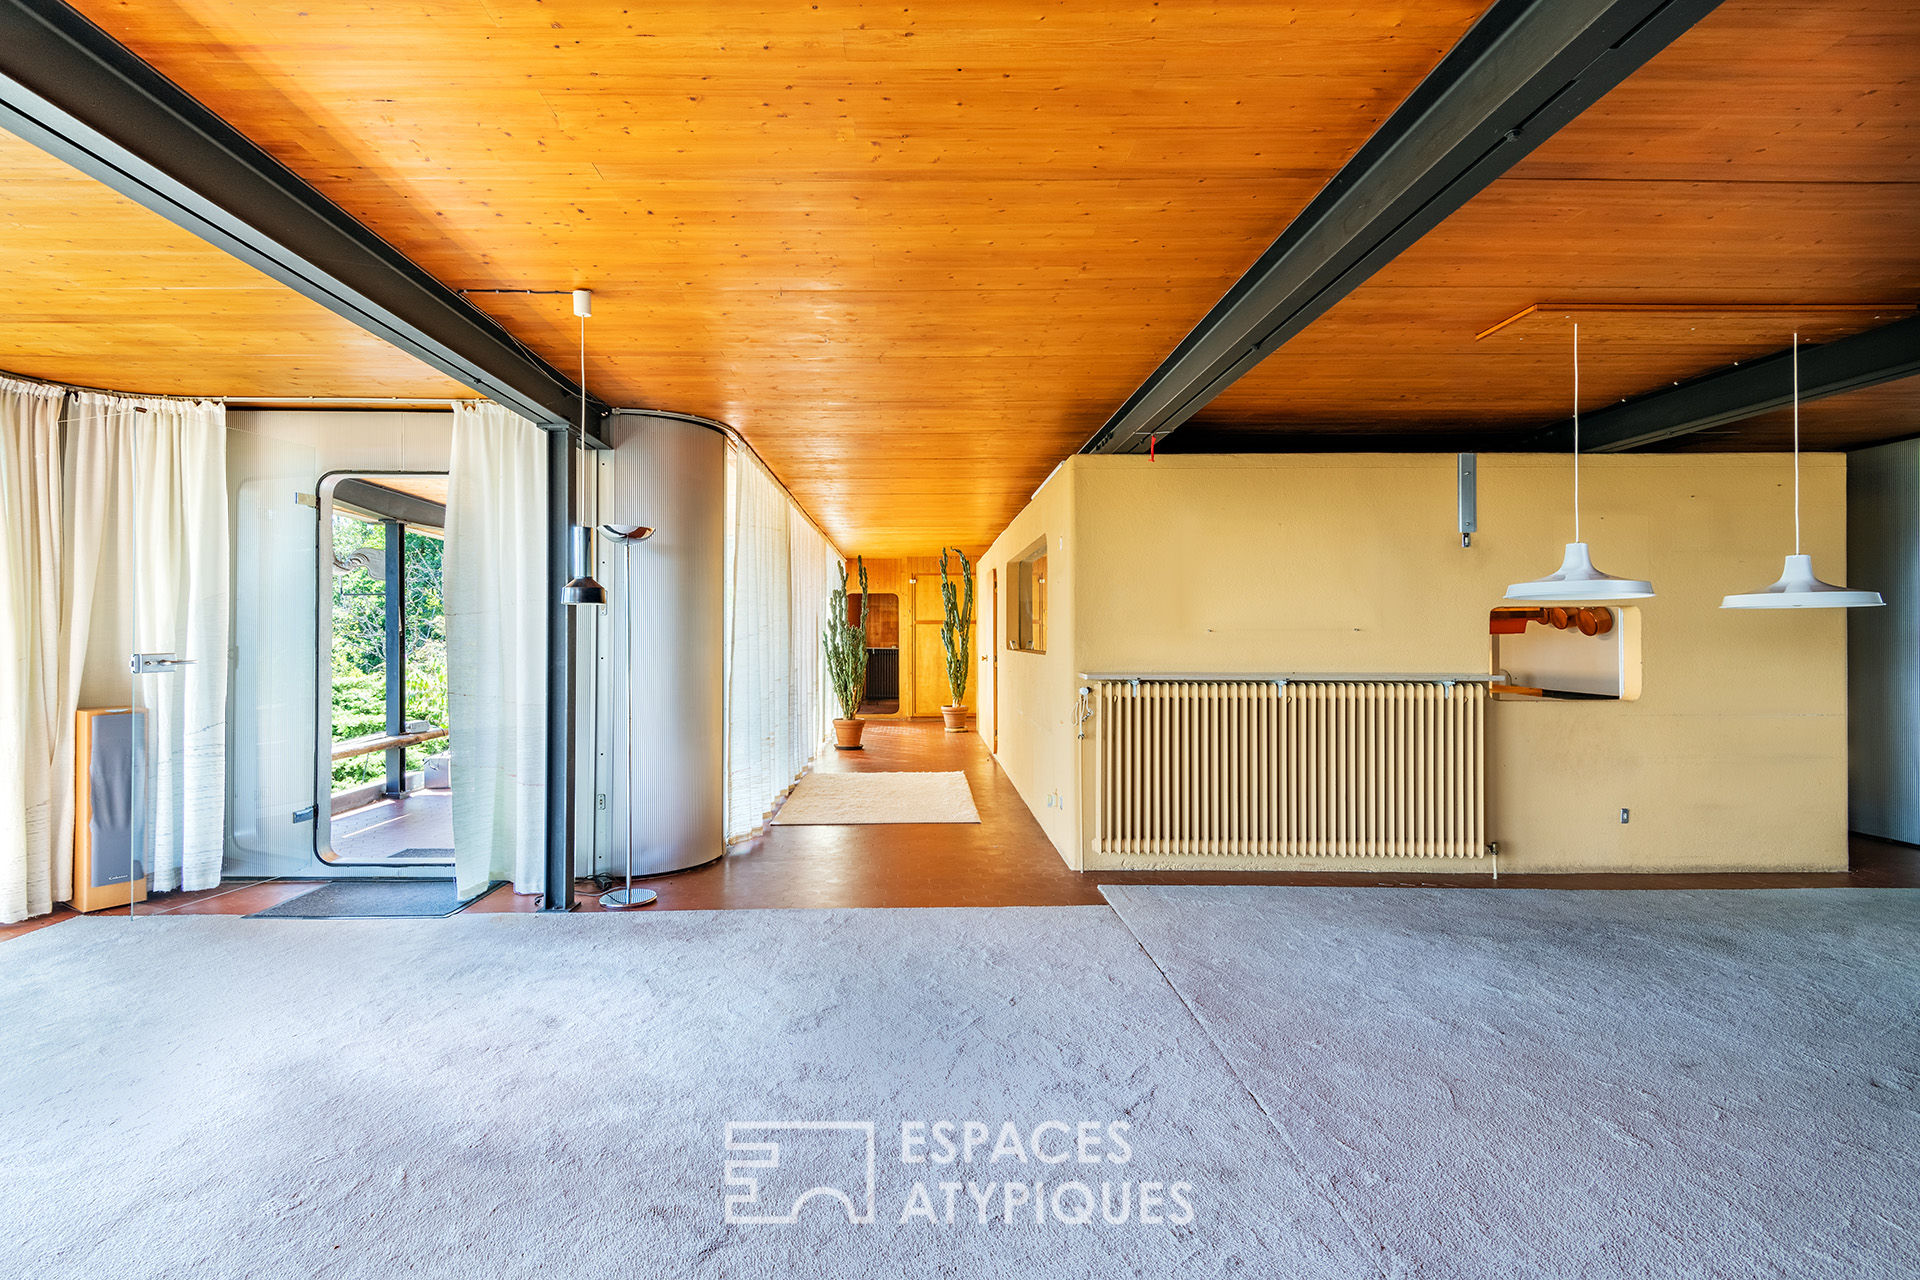 Maison Gauthier designed by Jean Prouvé for his daughter - now for sale